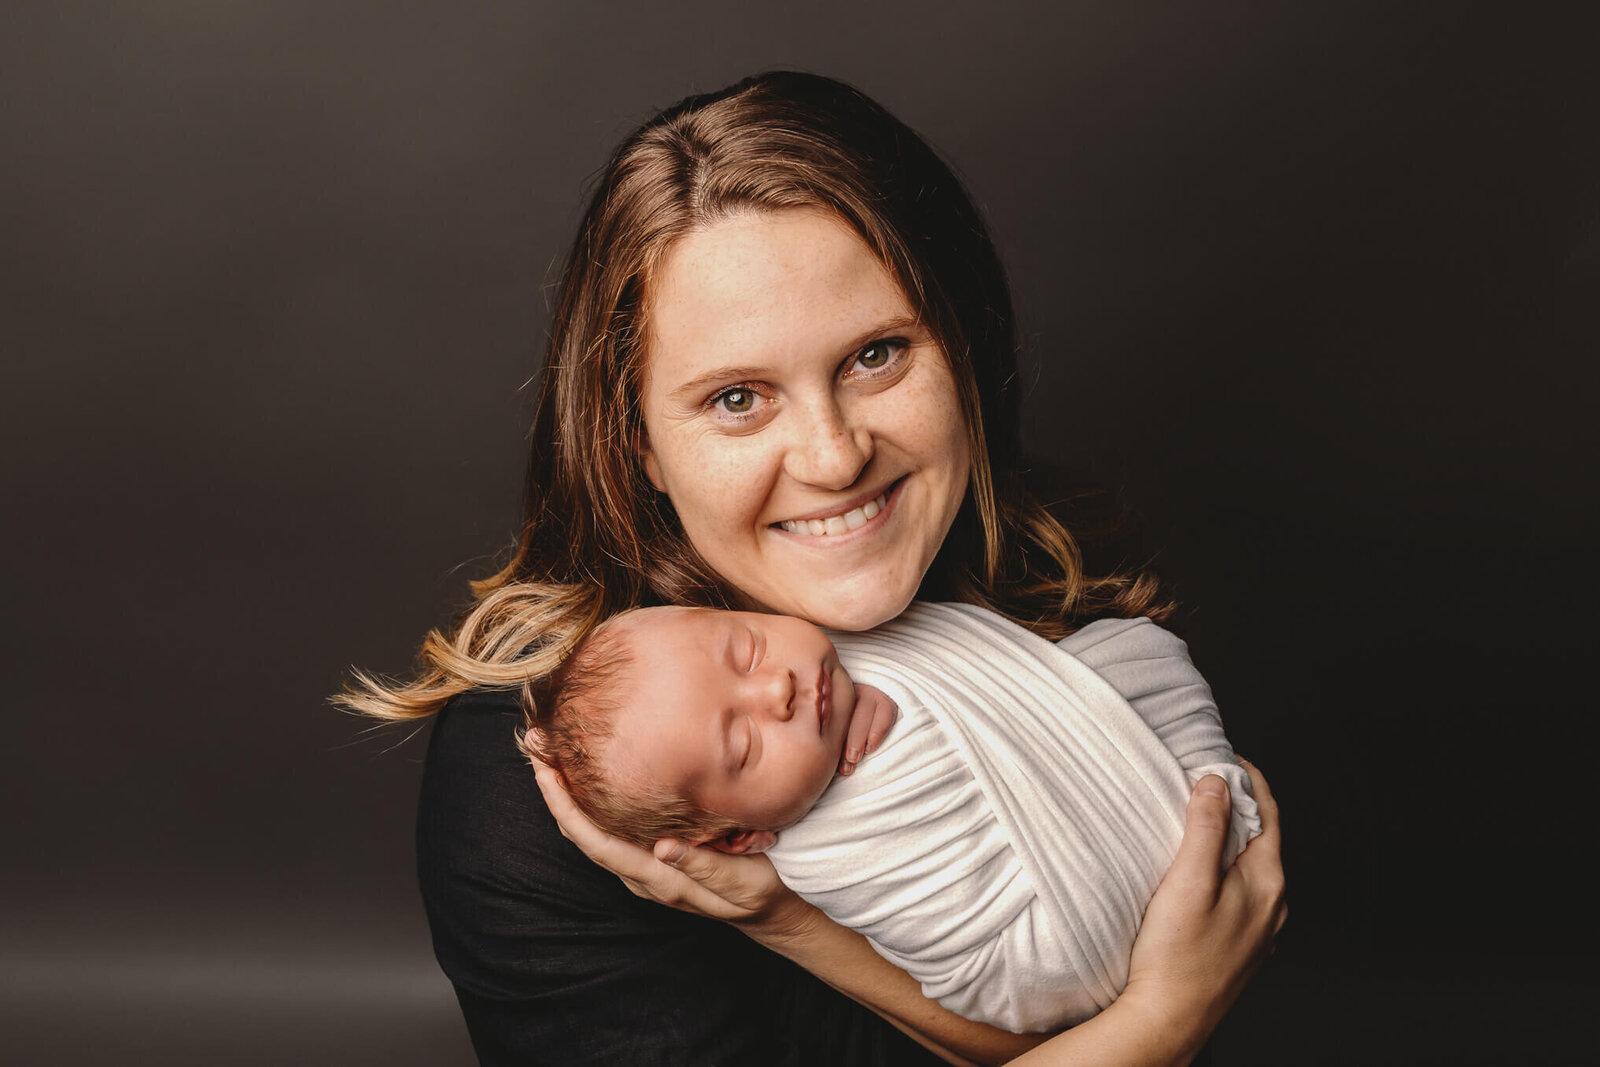 Mom in a black shirt smiling holding swaddled newborn baby in studio